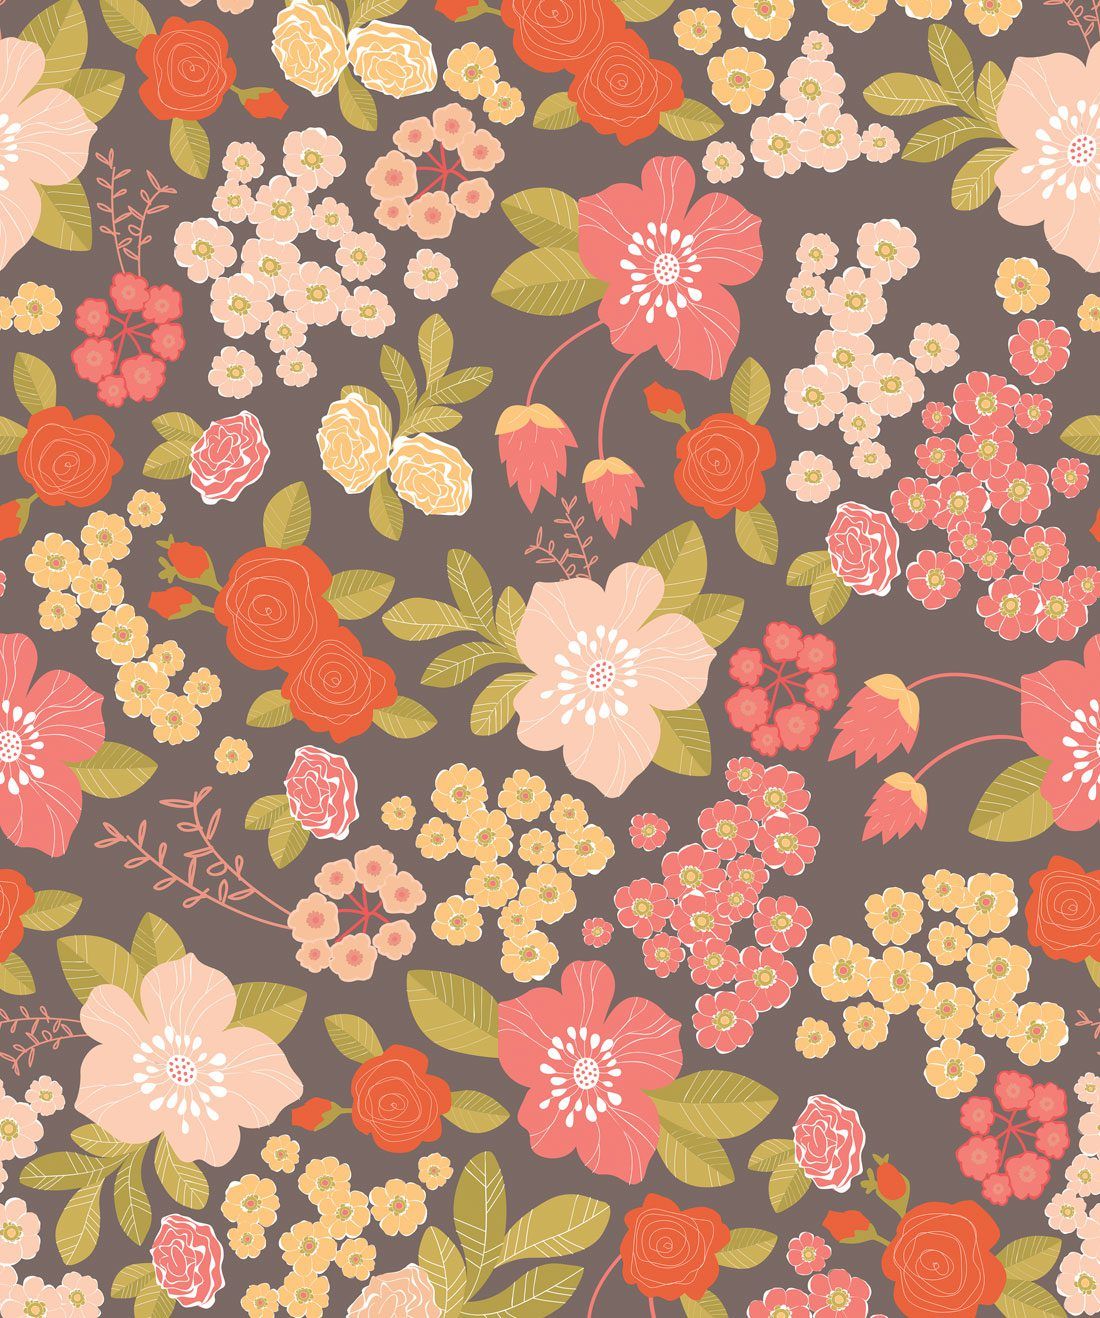 Stormy Bouquet is a playful floral Wallpaper